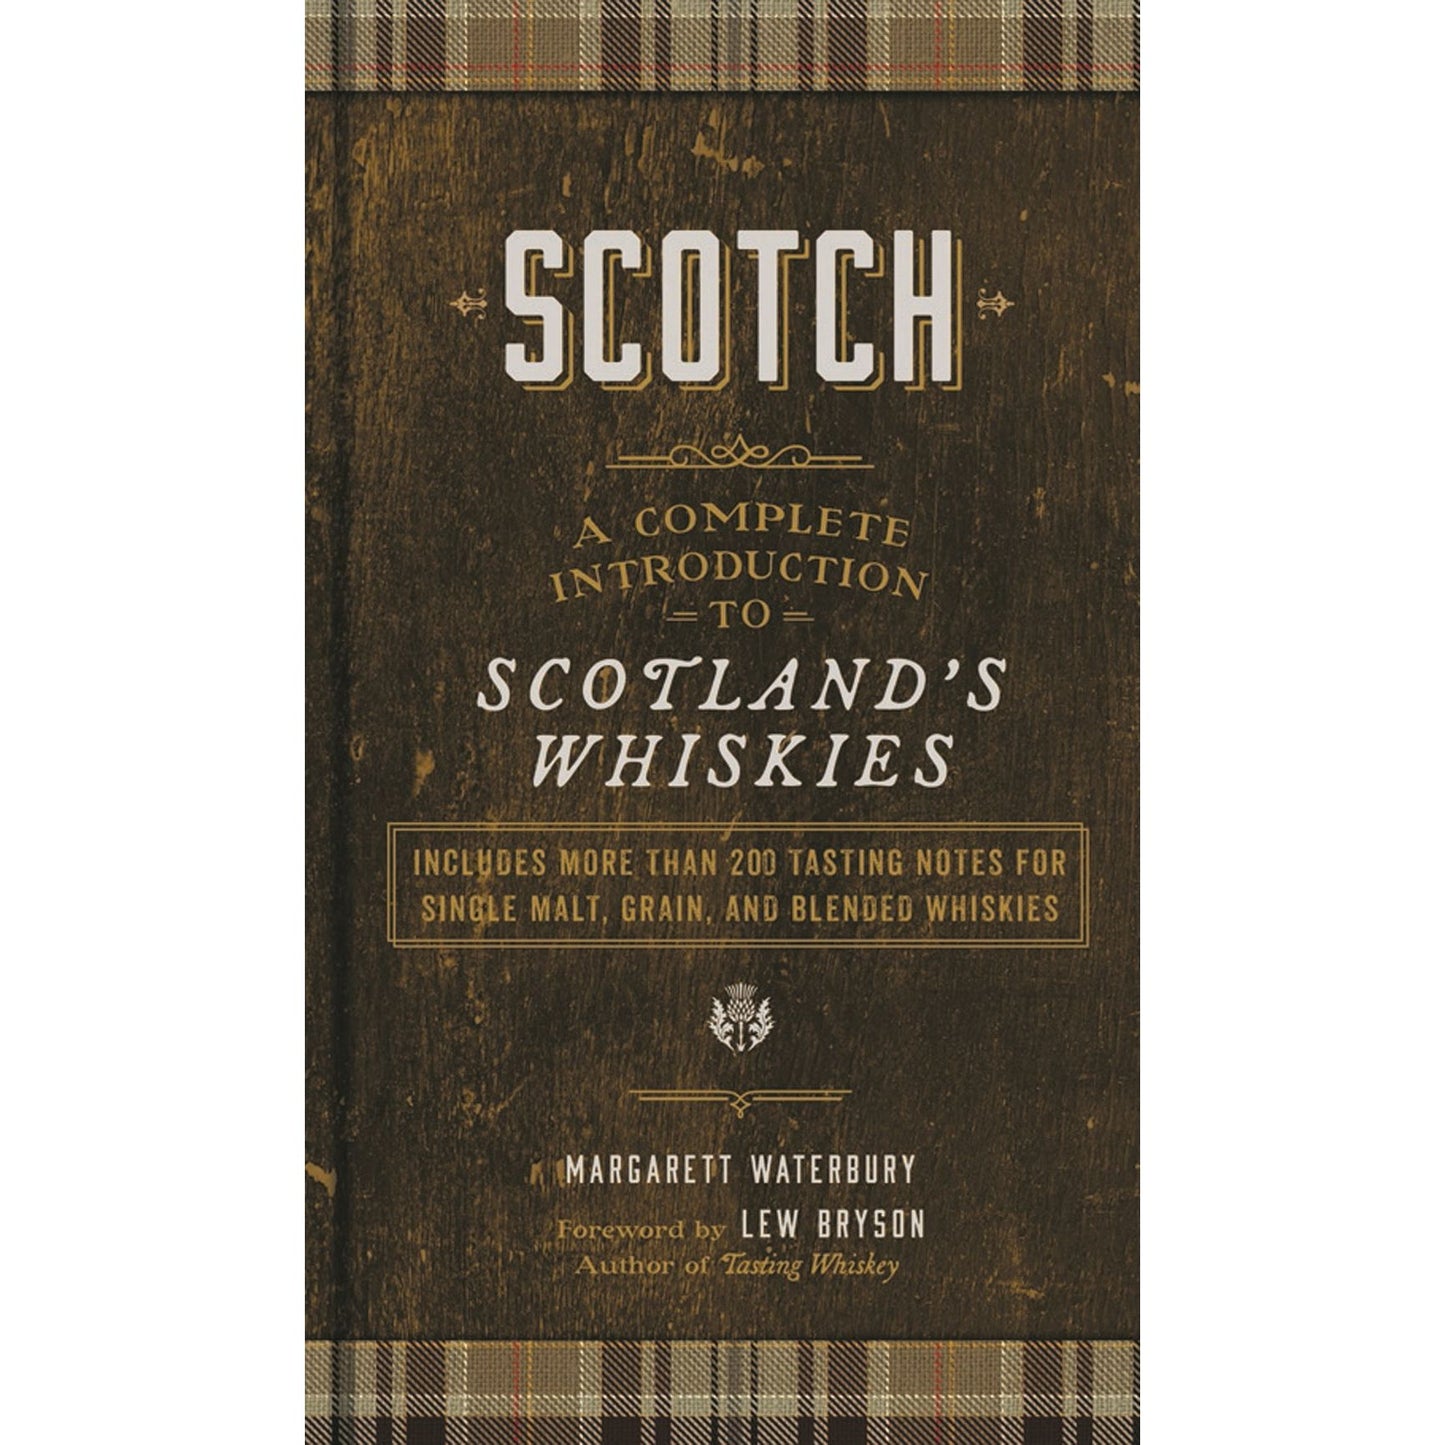 Scotch: A Complete Introduction to Scotland's Whiskies (Margaret Waterbury)